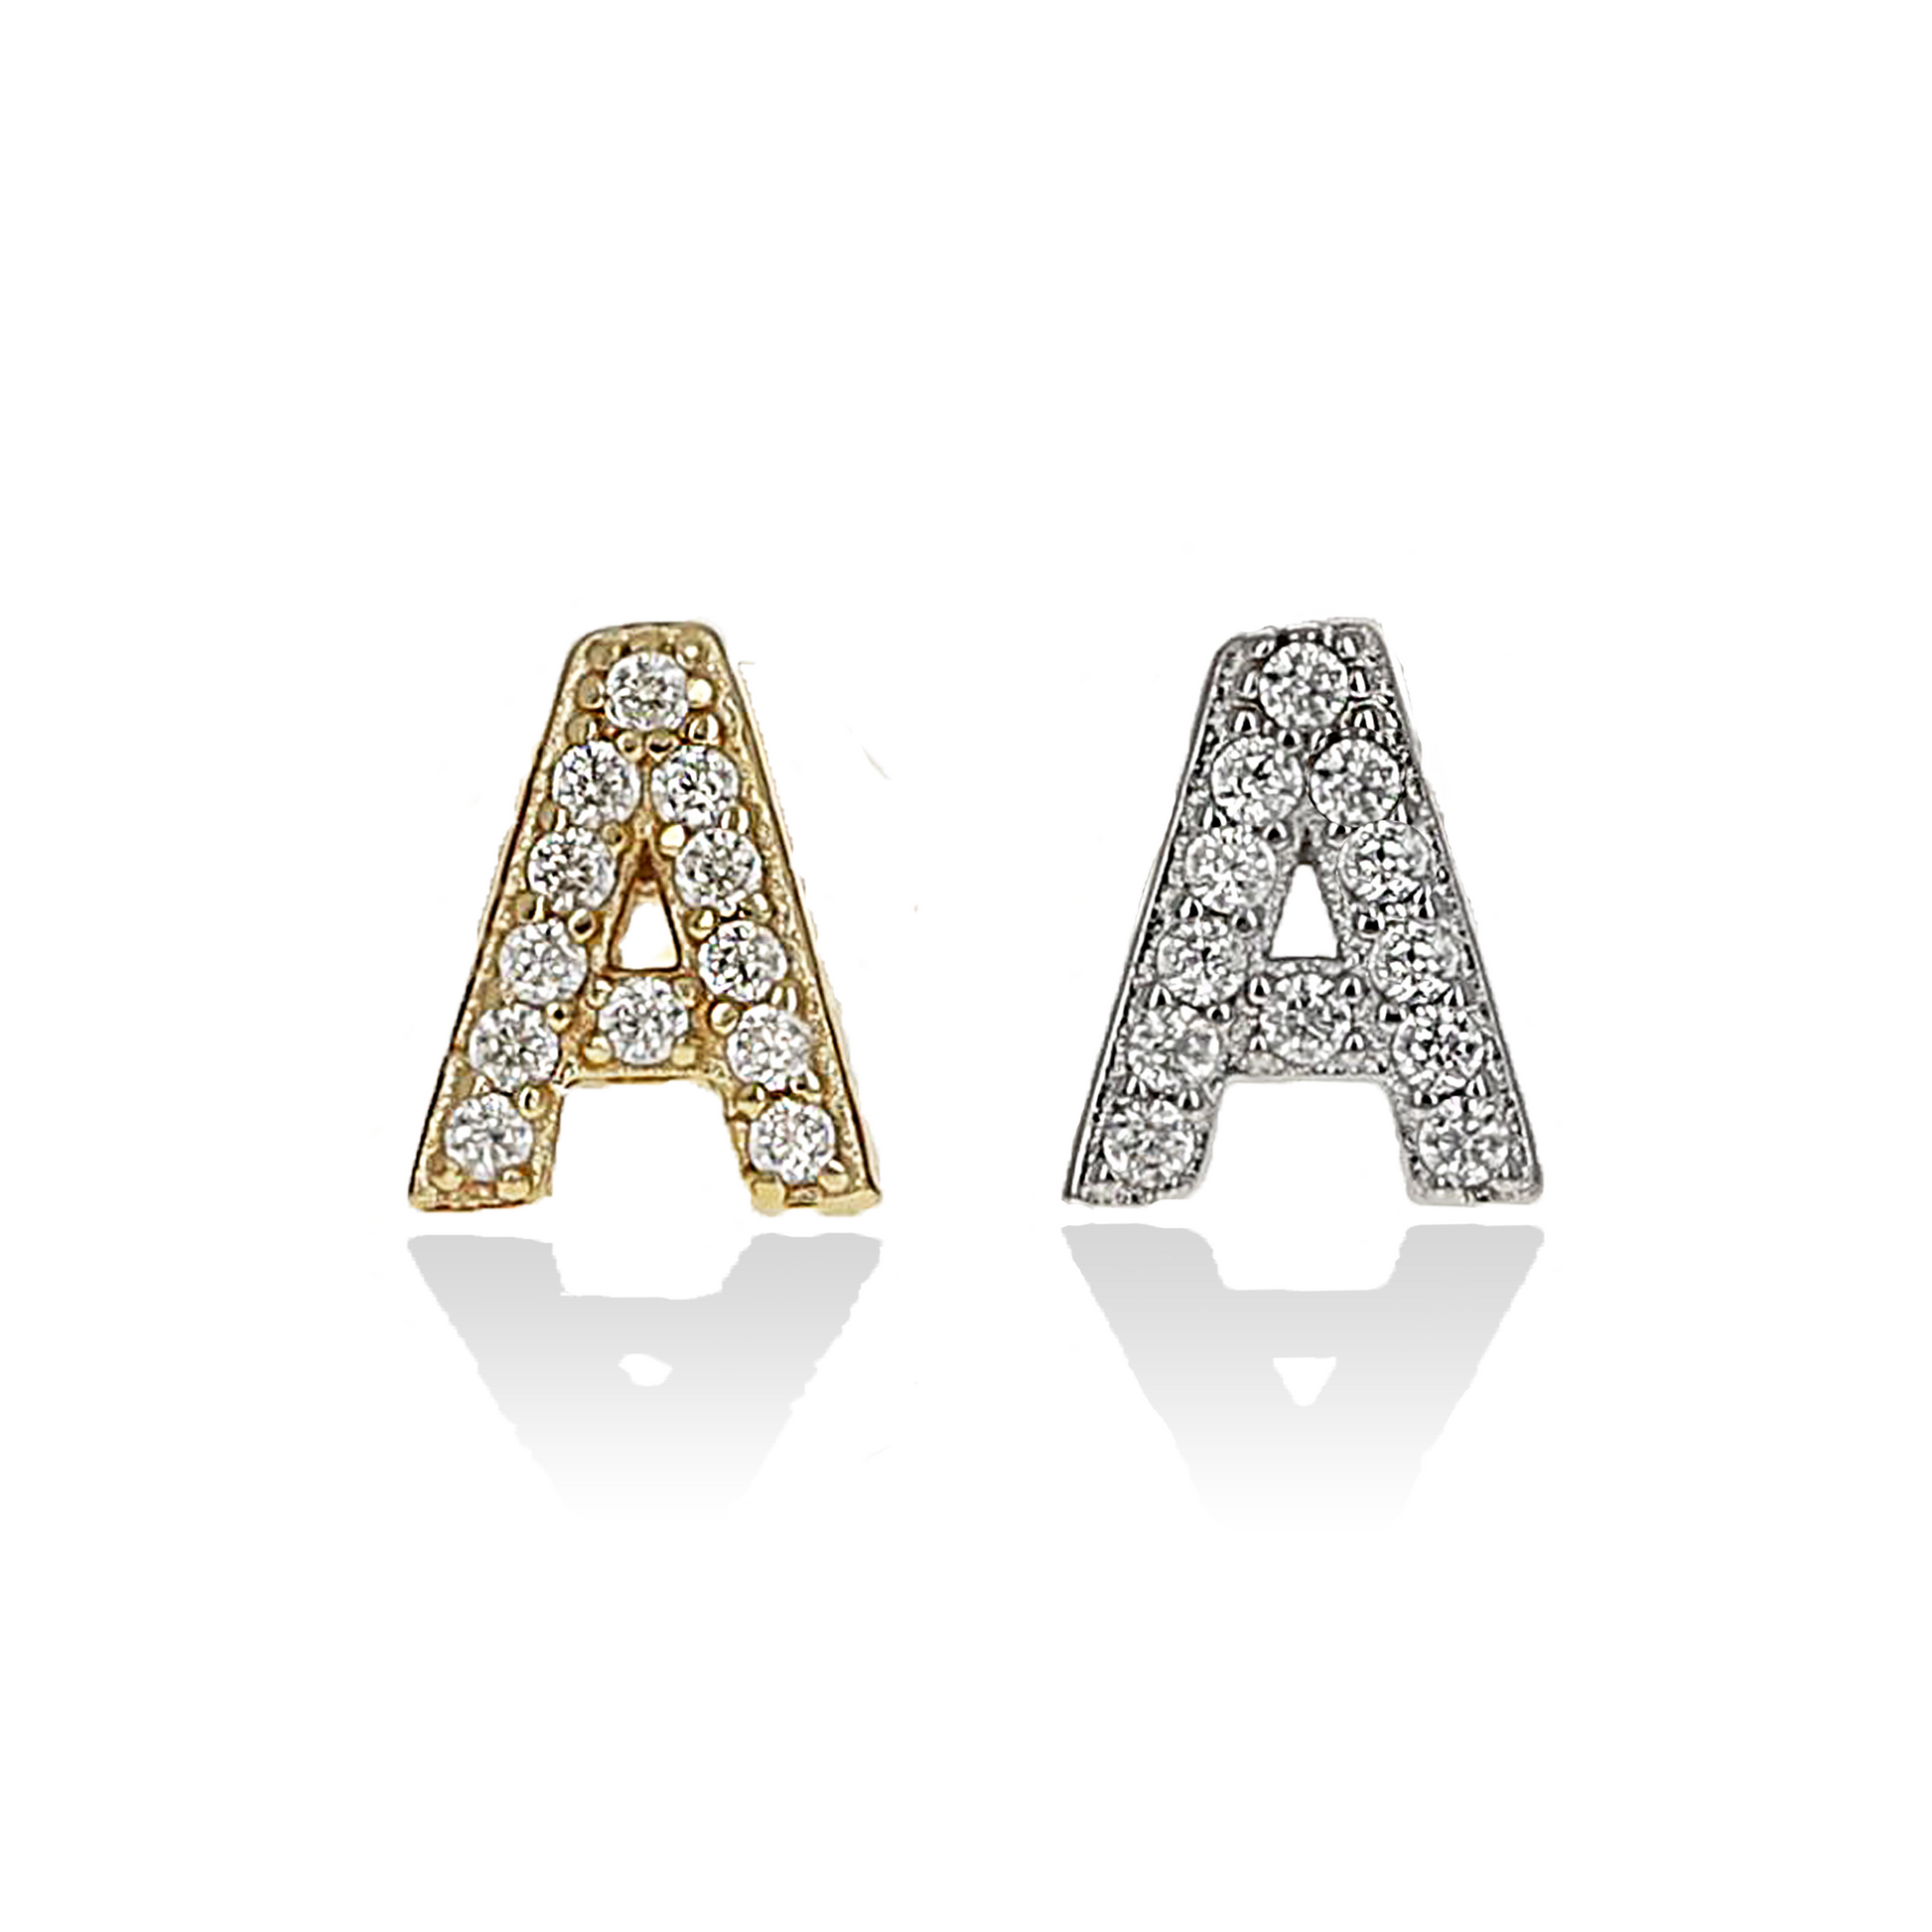 Alexandra Marks | Individual Petite Initial Stud Earrings in Silver & Gold